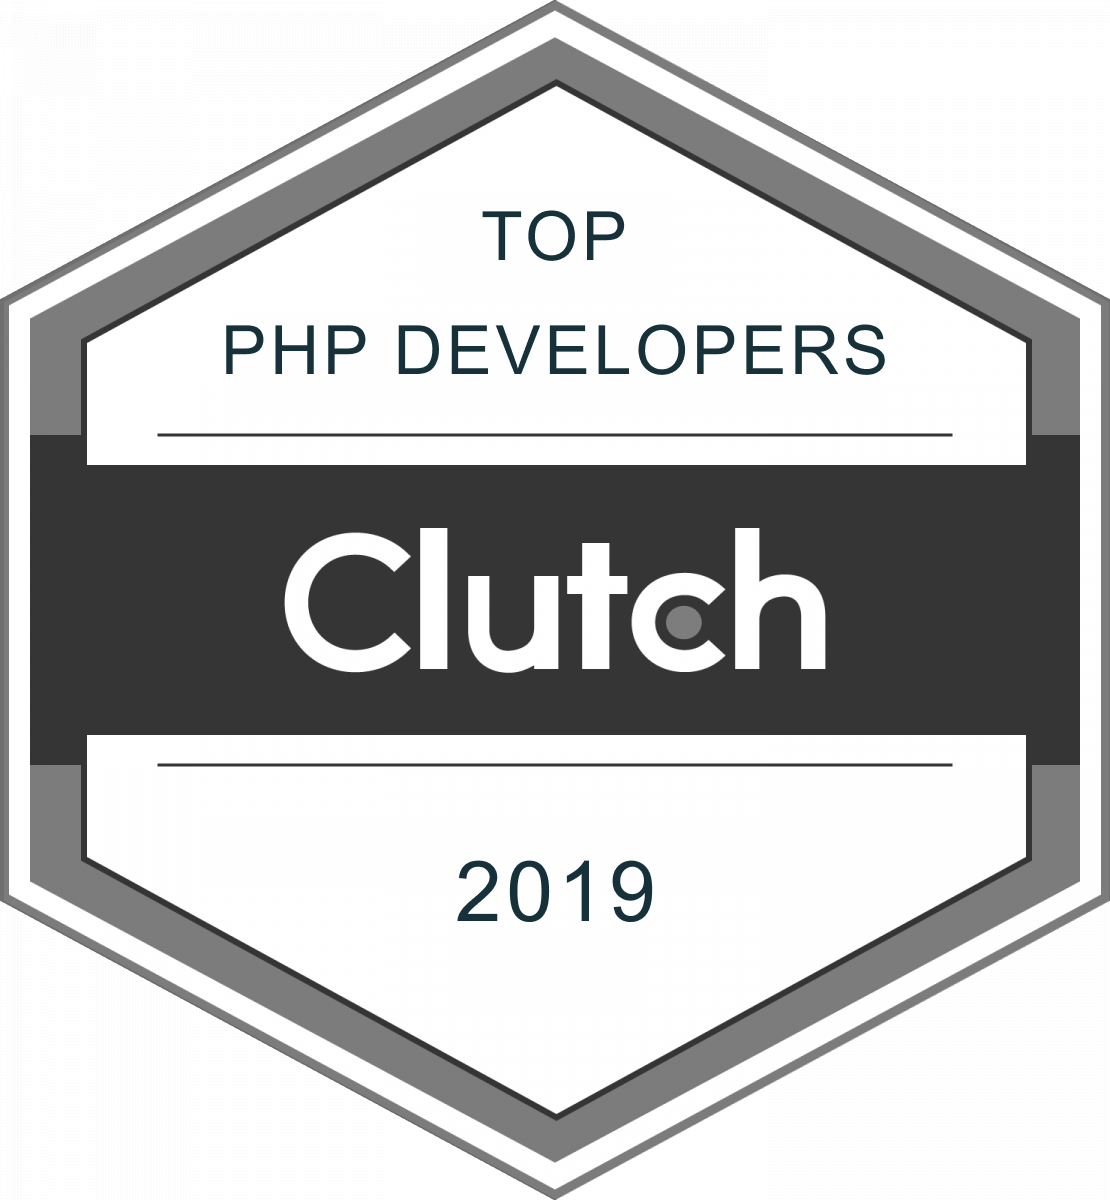 Top PHP Developers Clutch